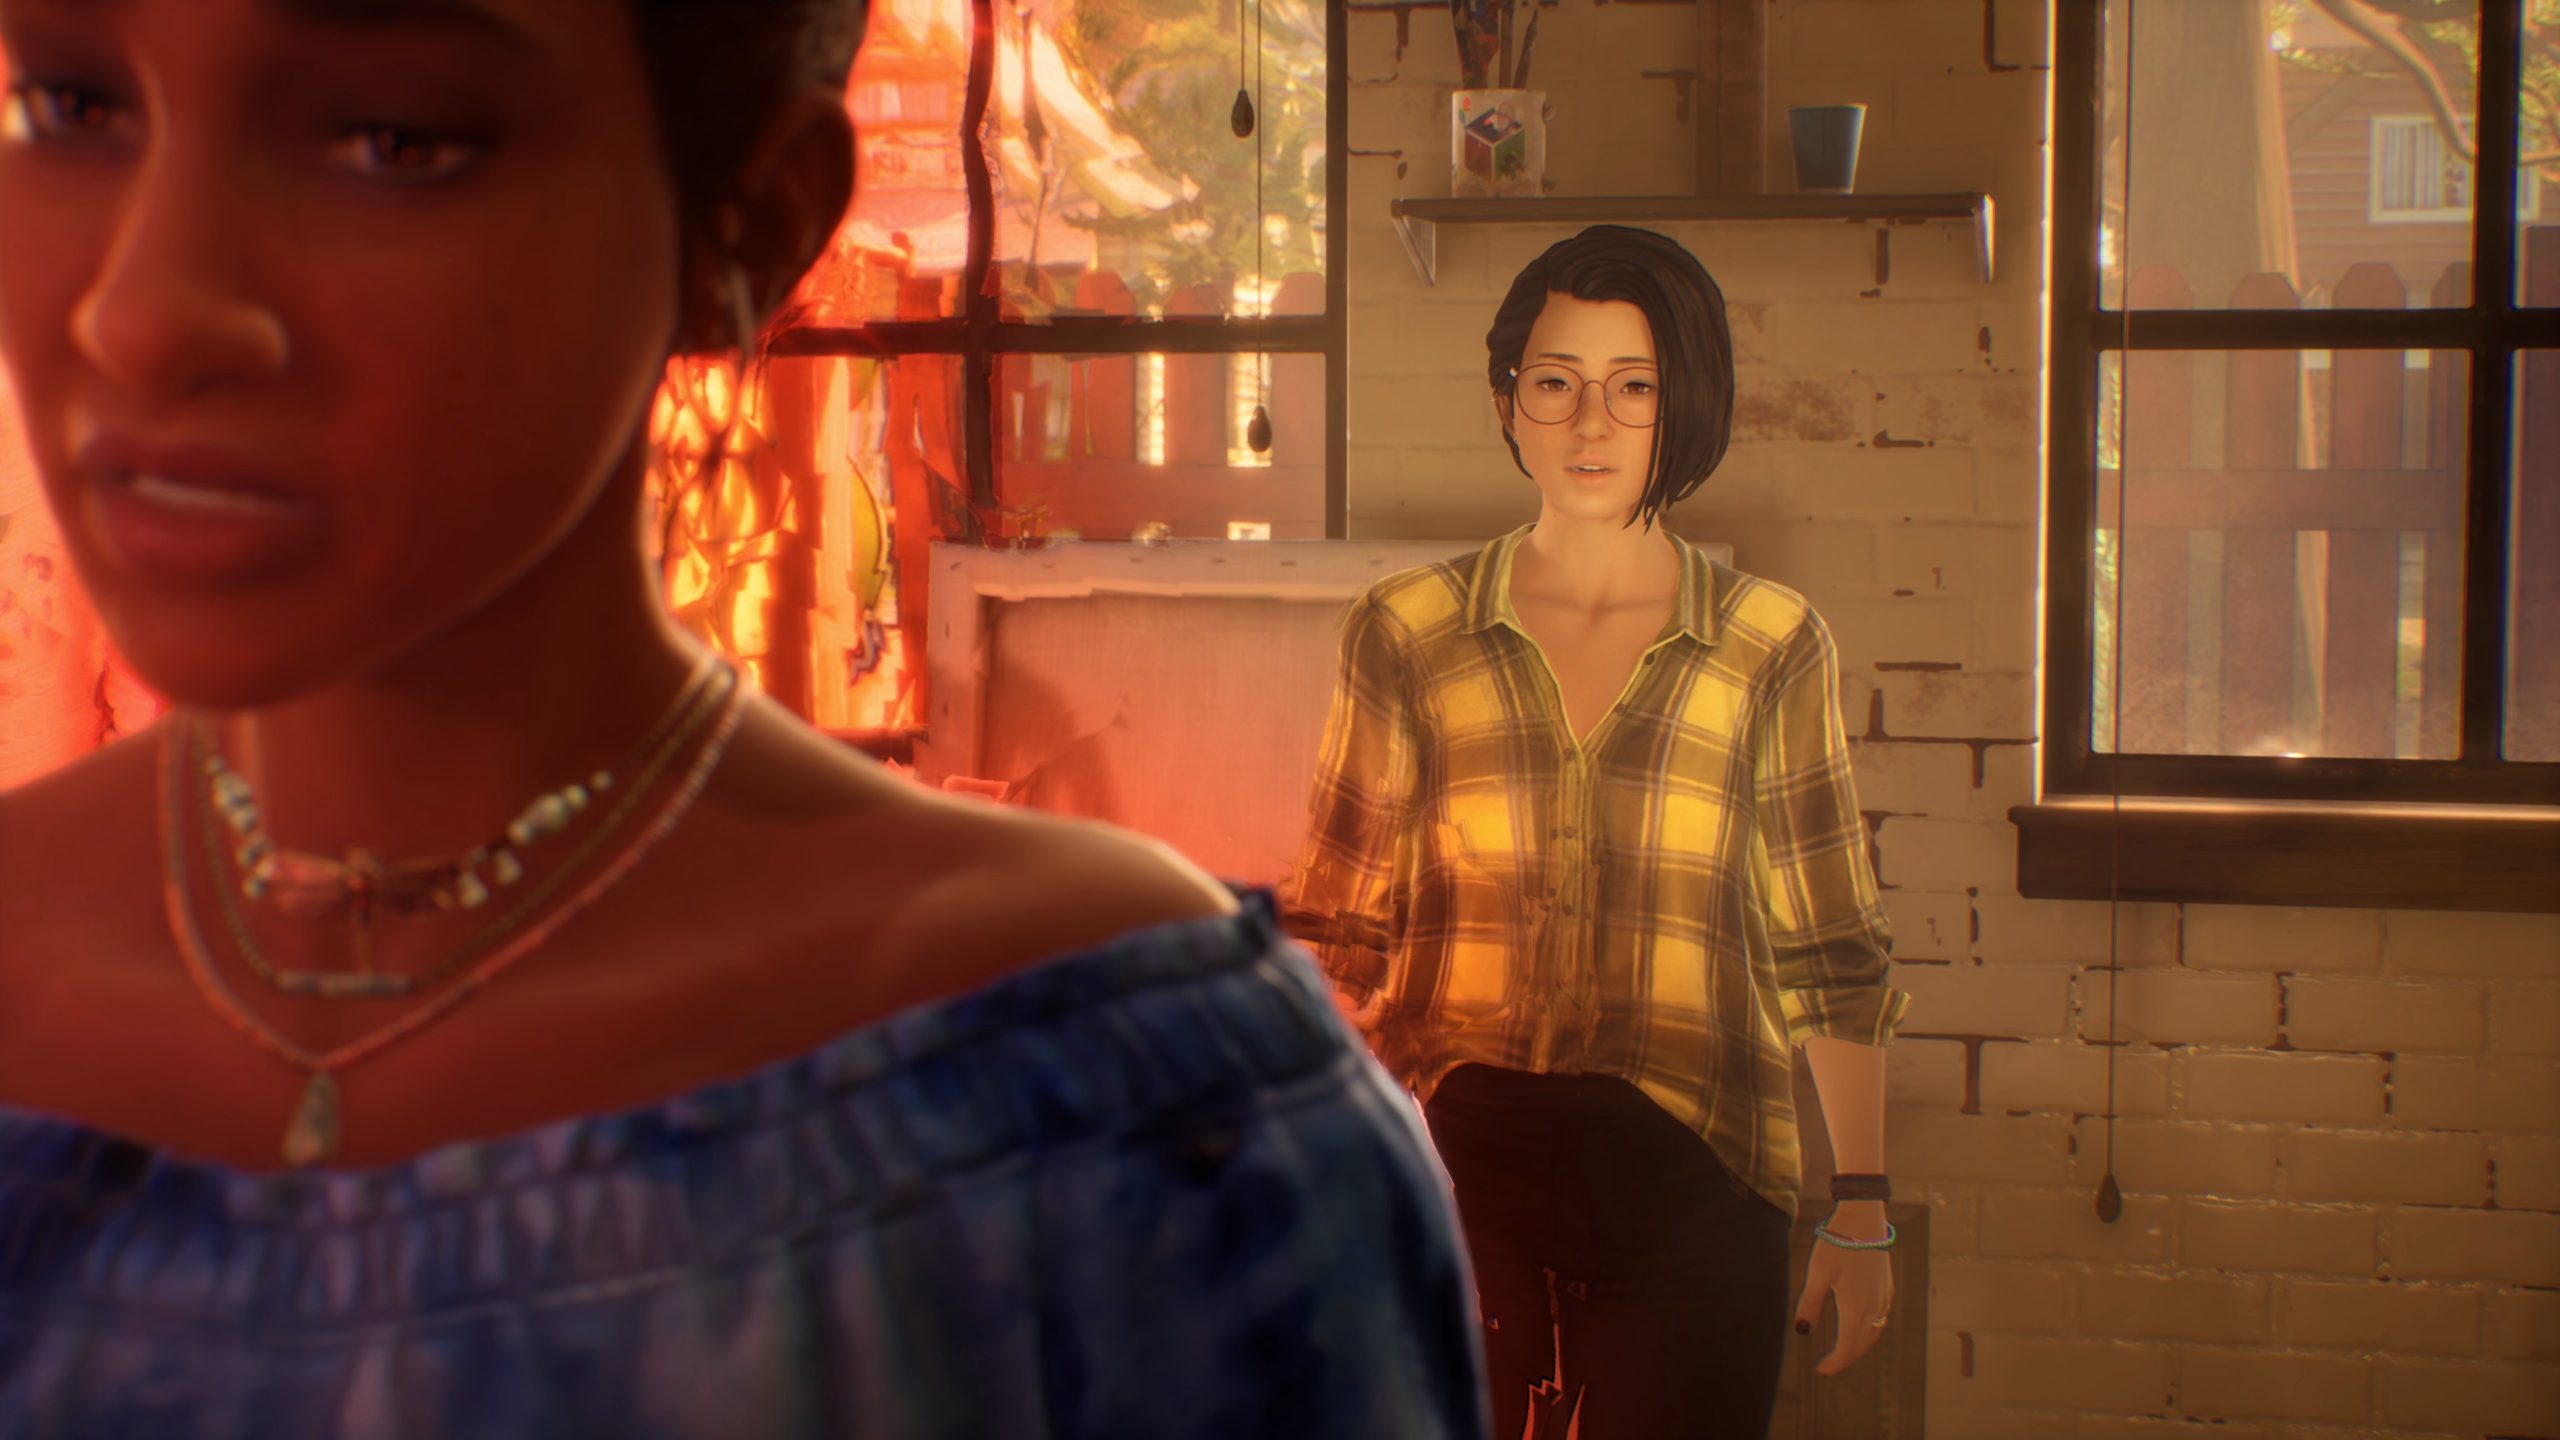 Life is Strange: True Colors - First Official Gameplay [ESRB